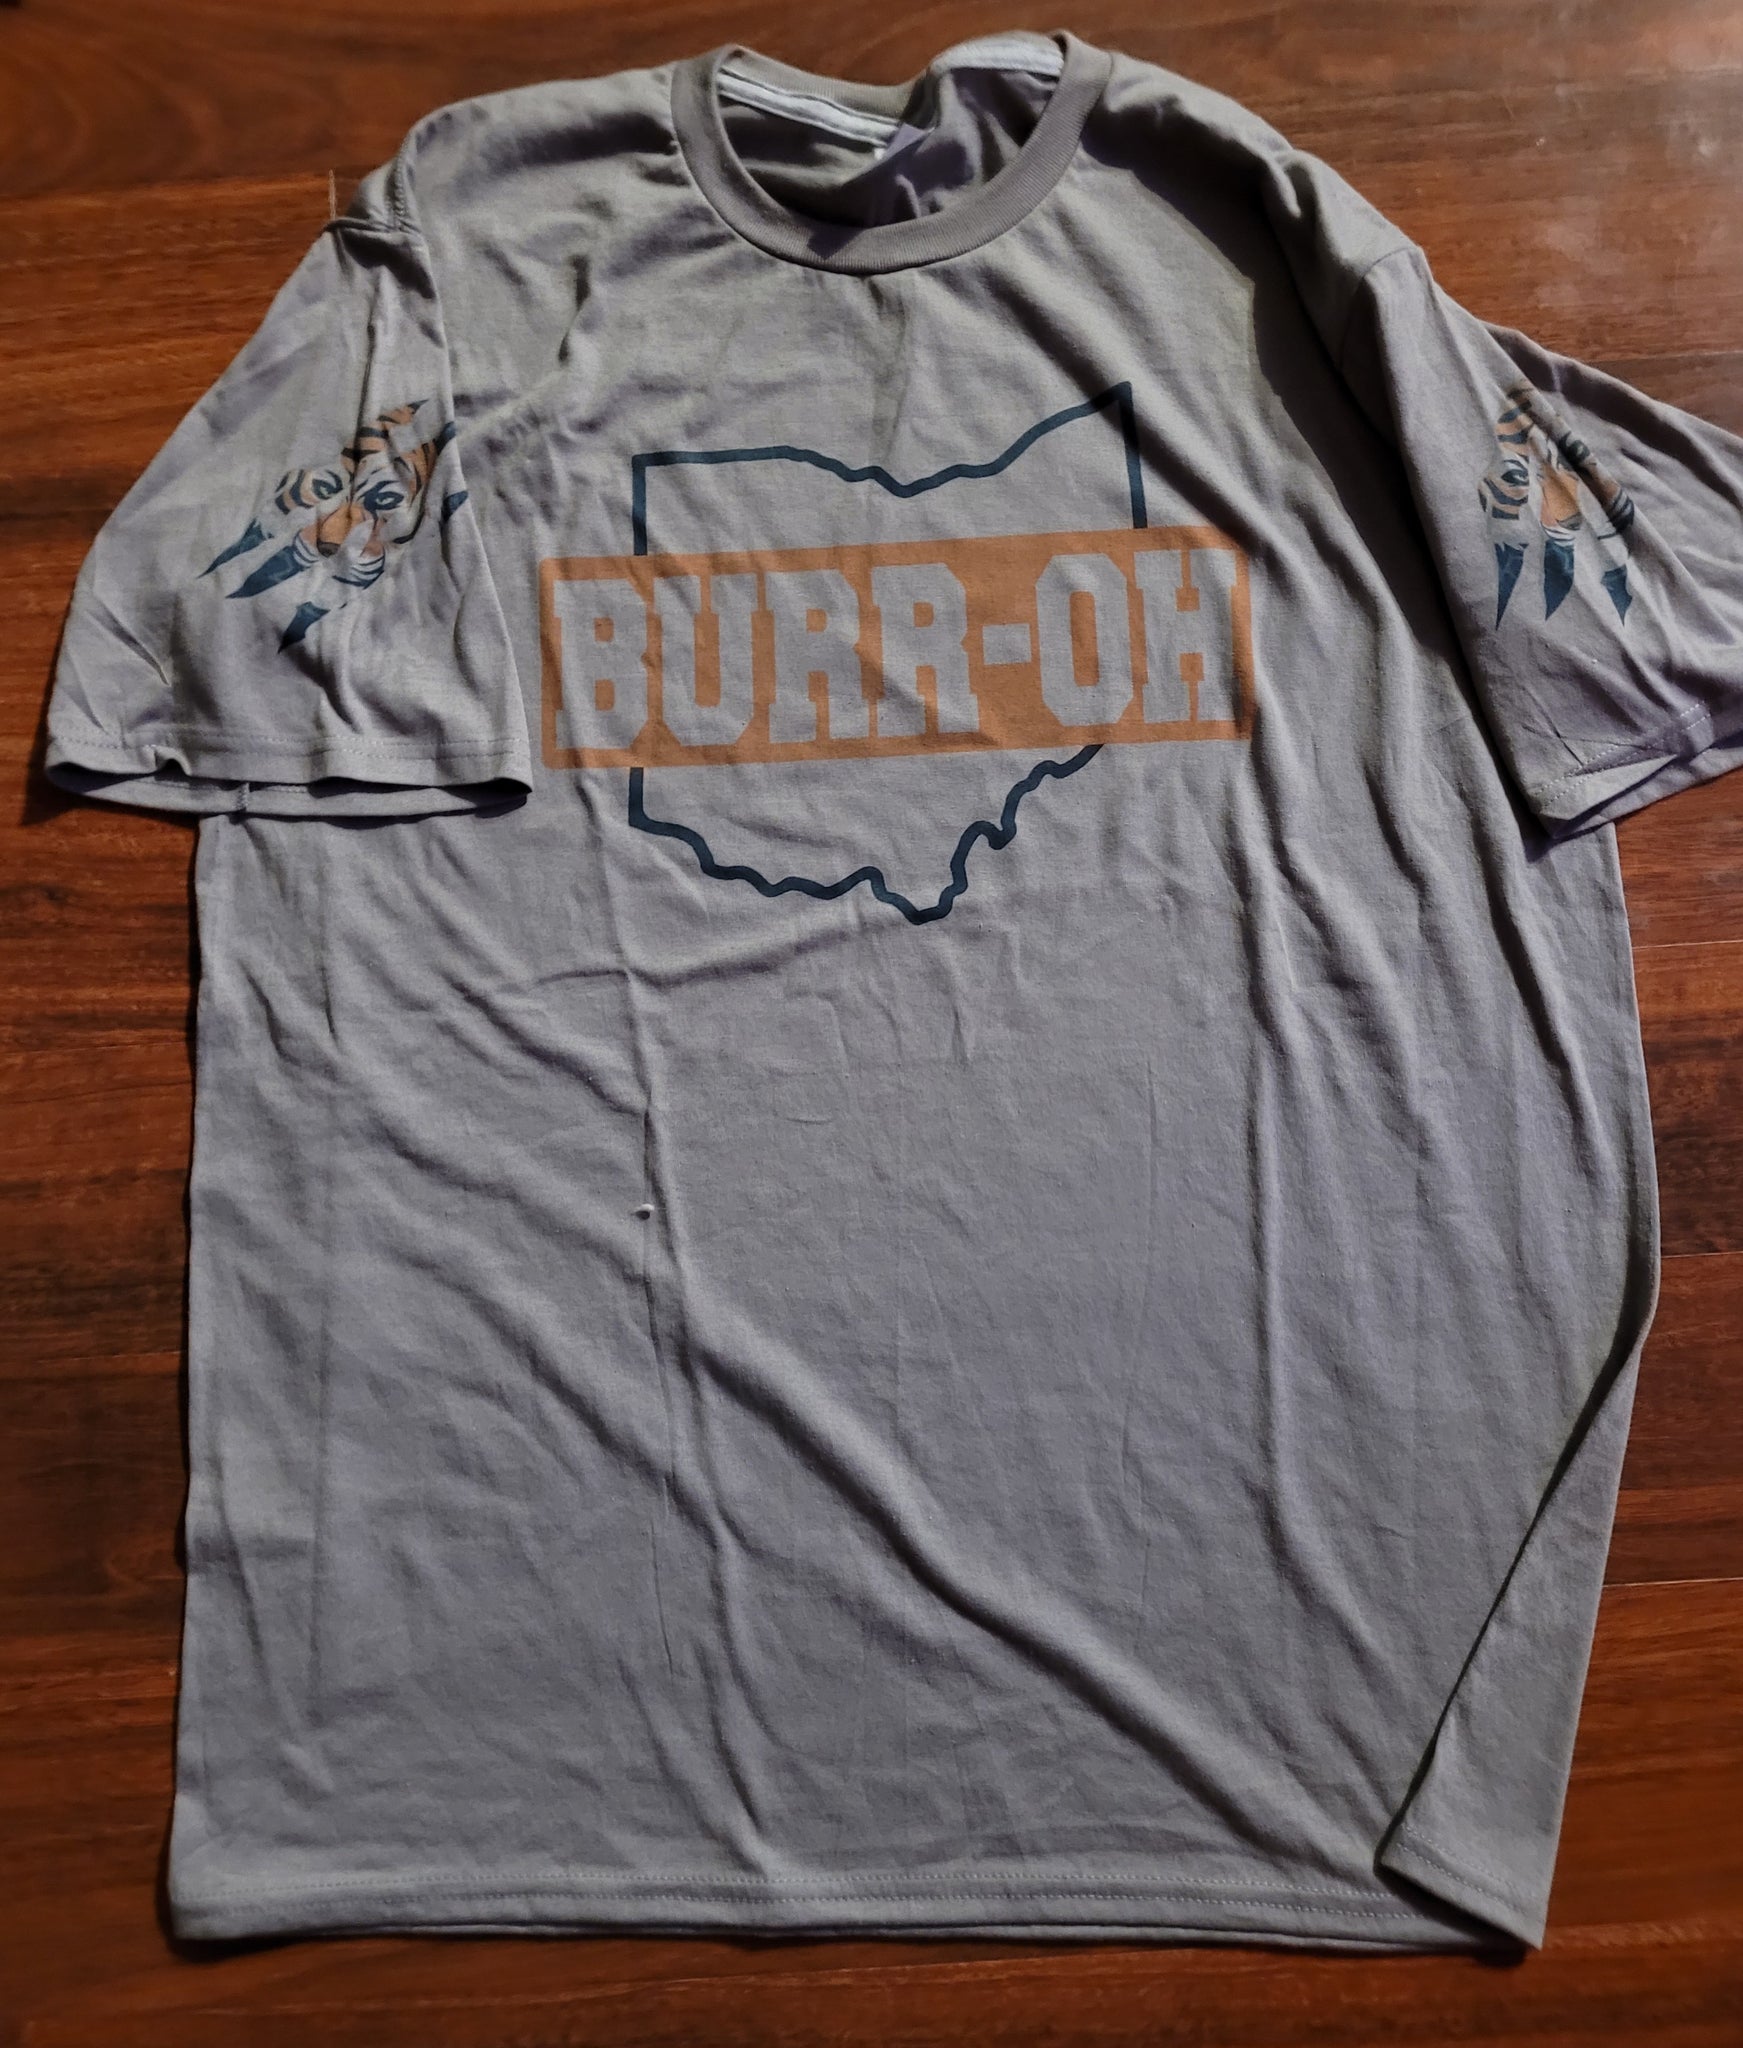 Large Gray BURR-OH with tiger sleeves tee